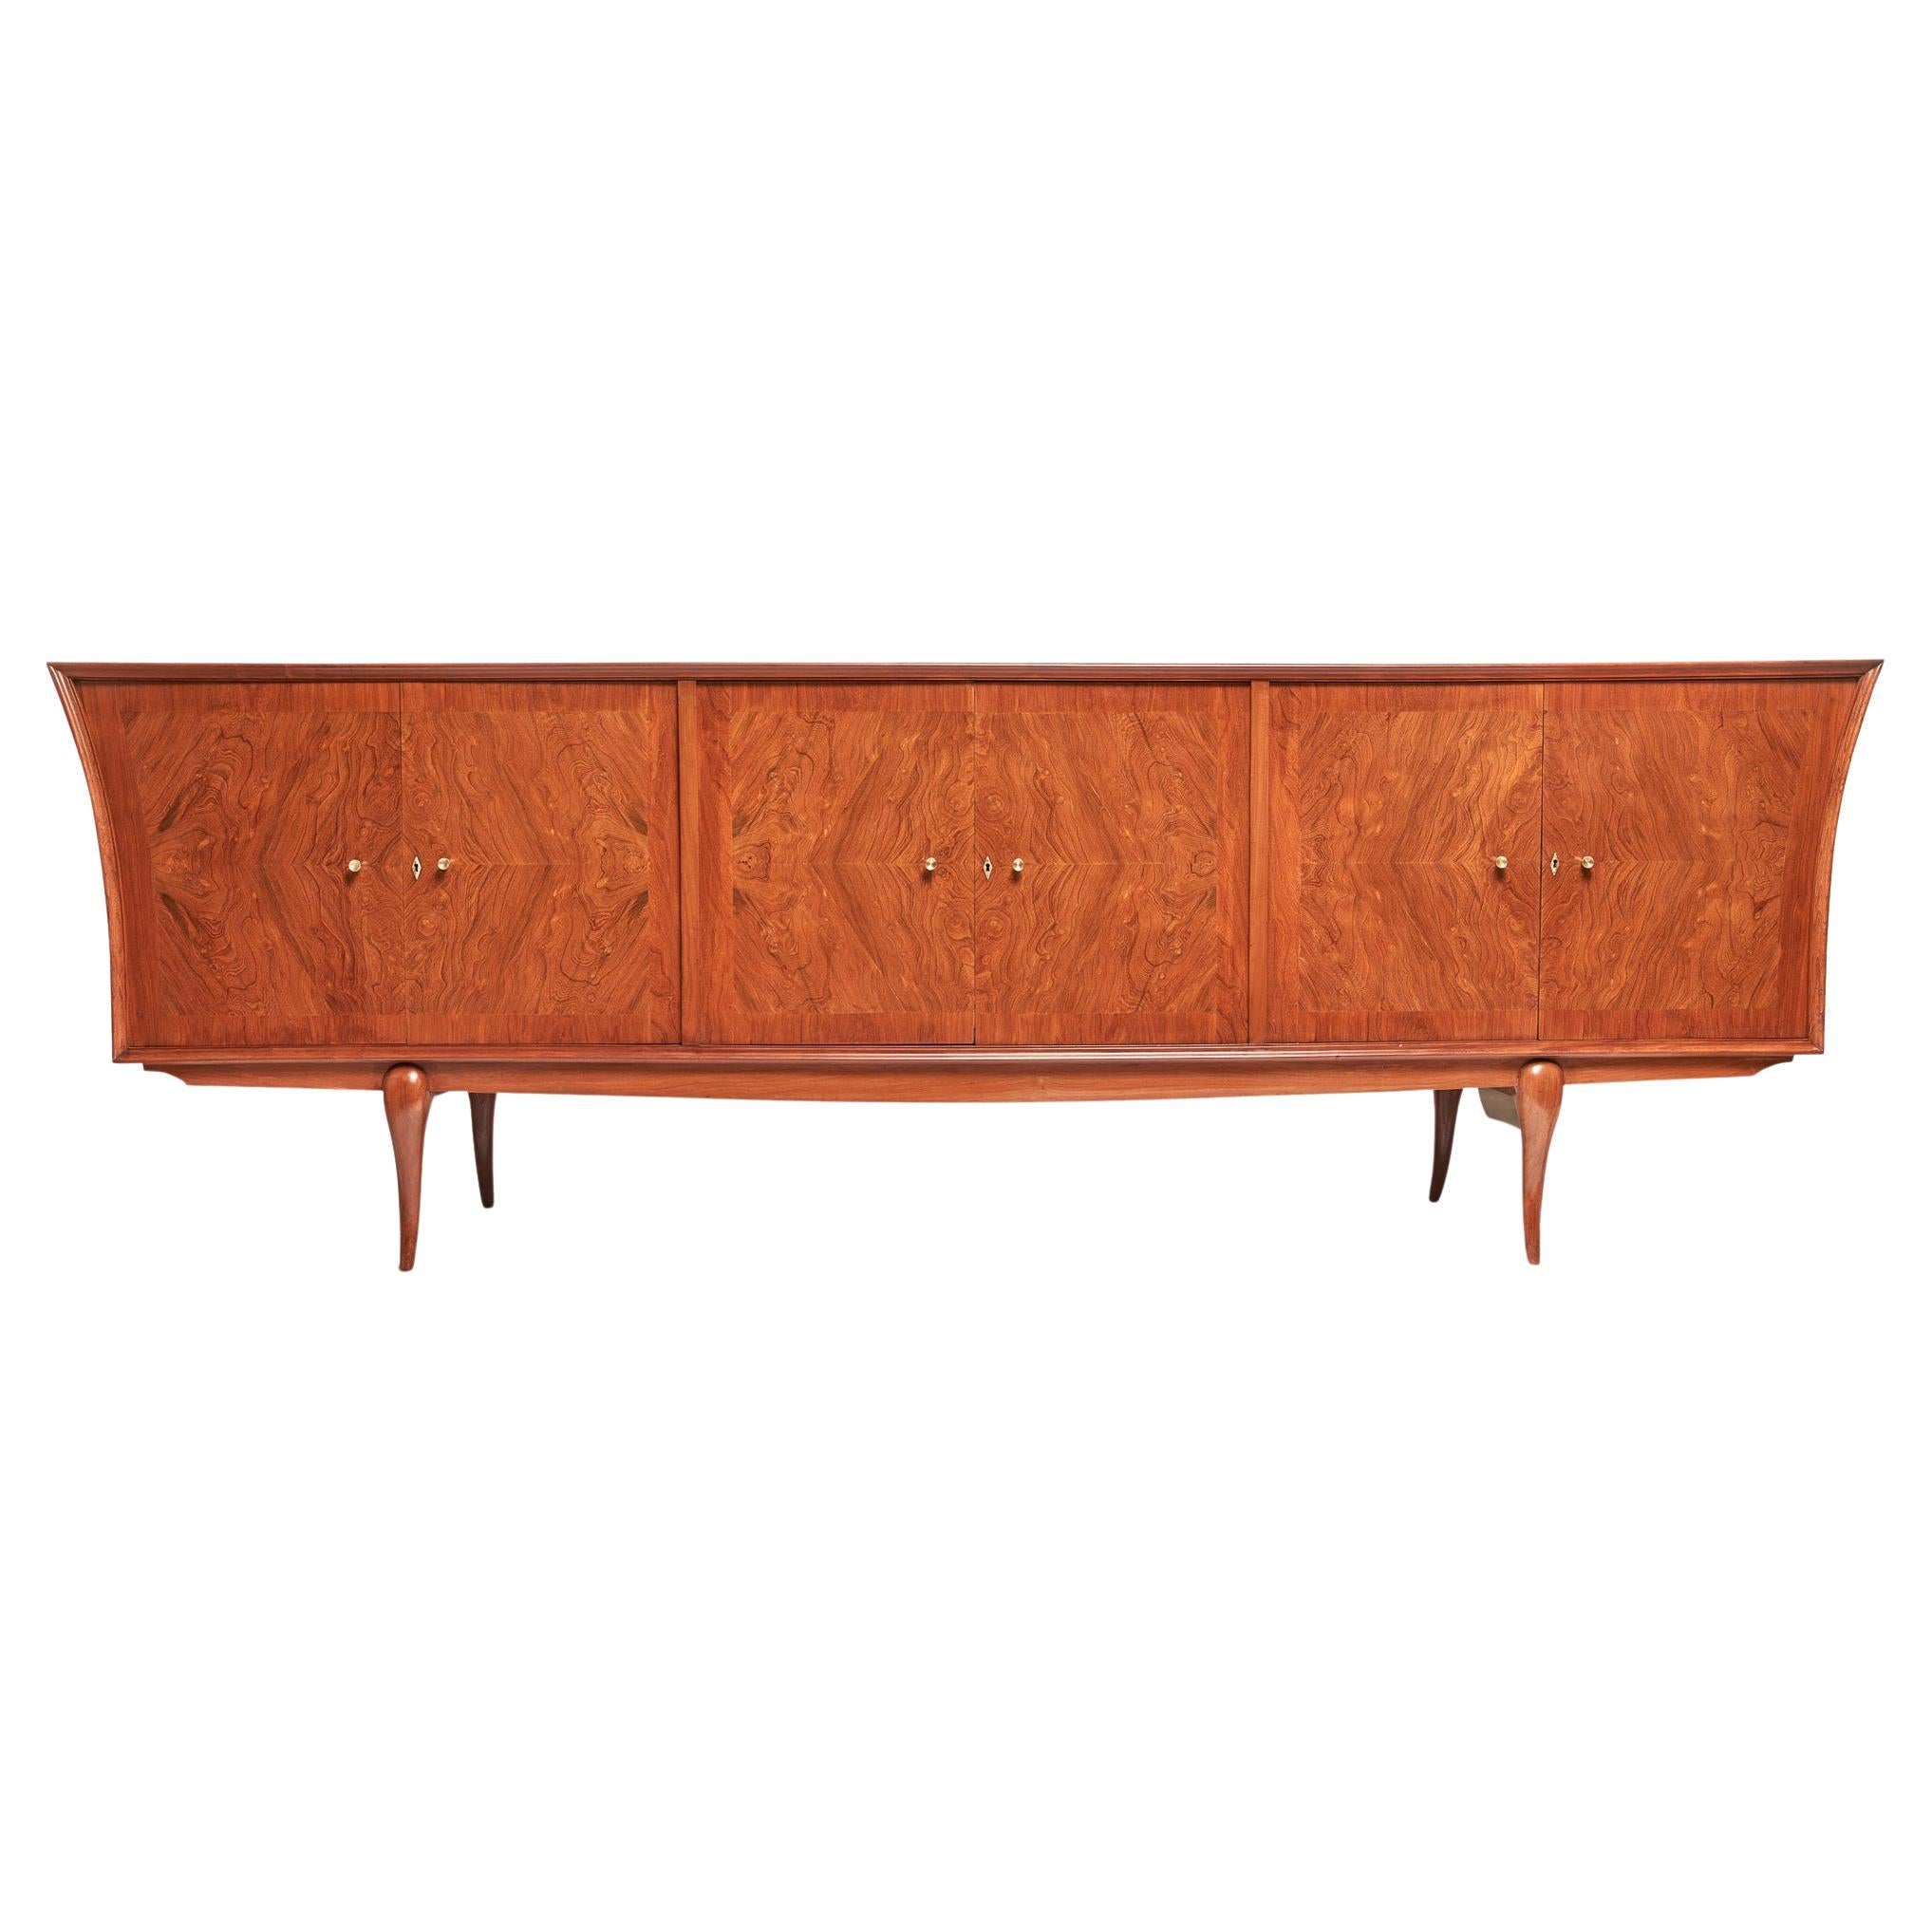 Mid-Century Modern Credenza in Caviuna Hardwood by Giuseppe Scapinelli, 1956 For Sale